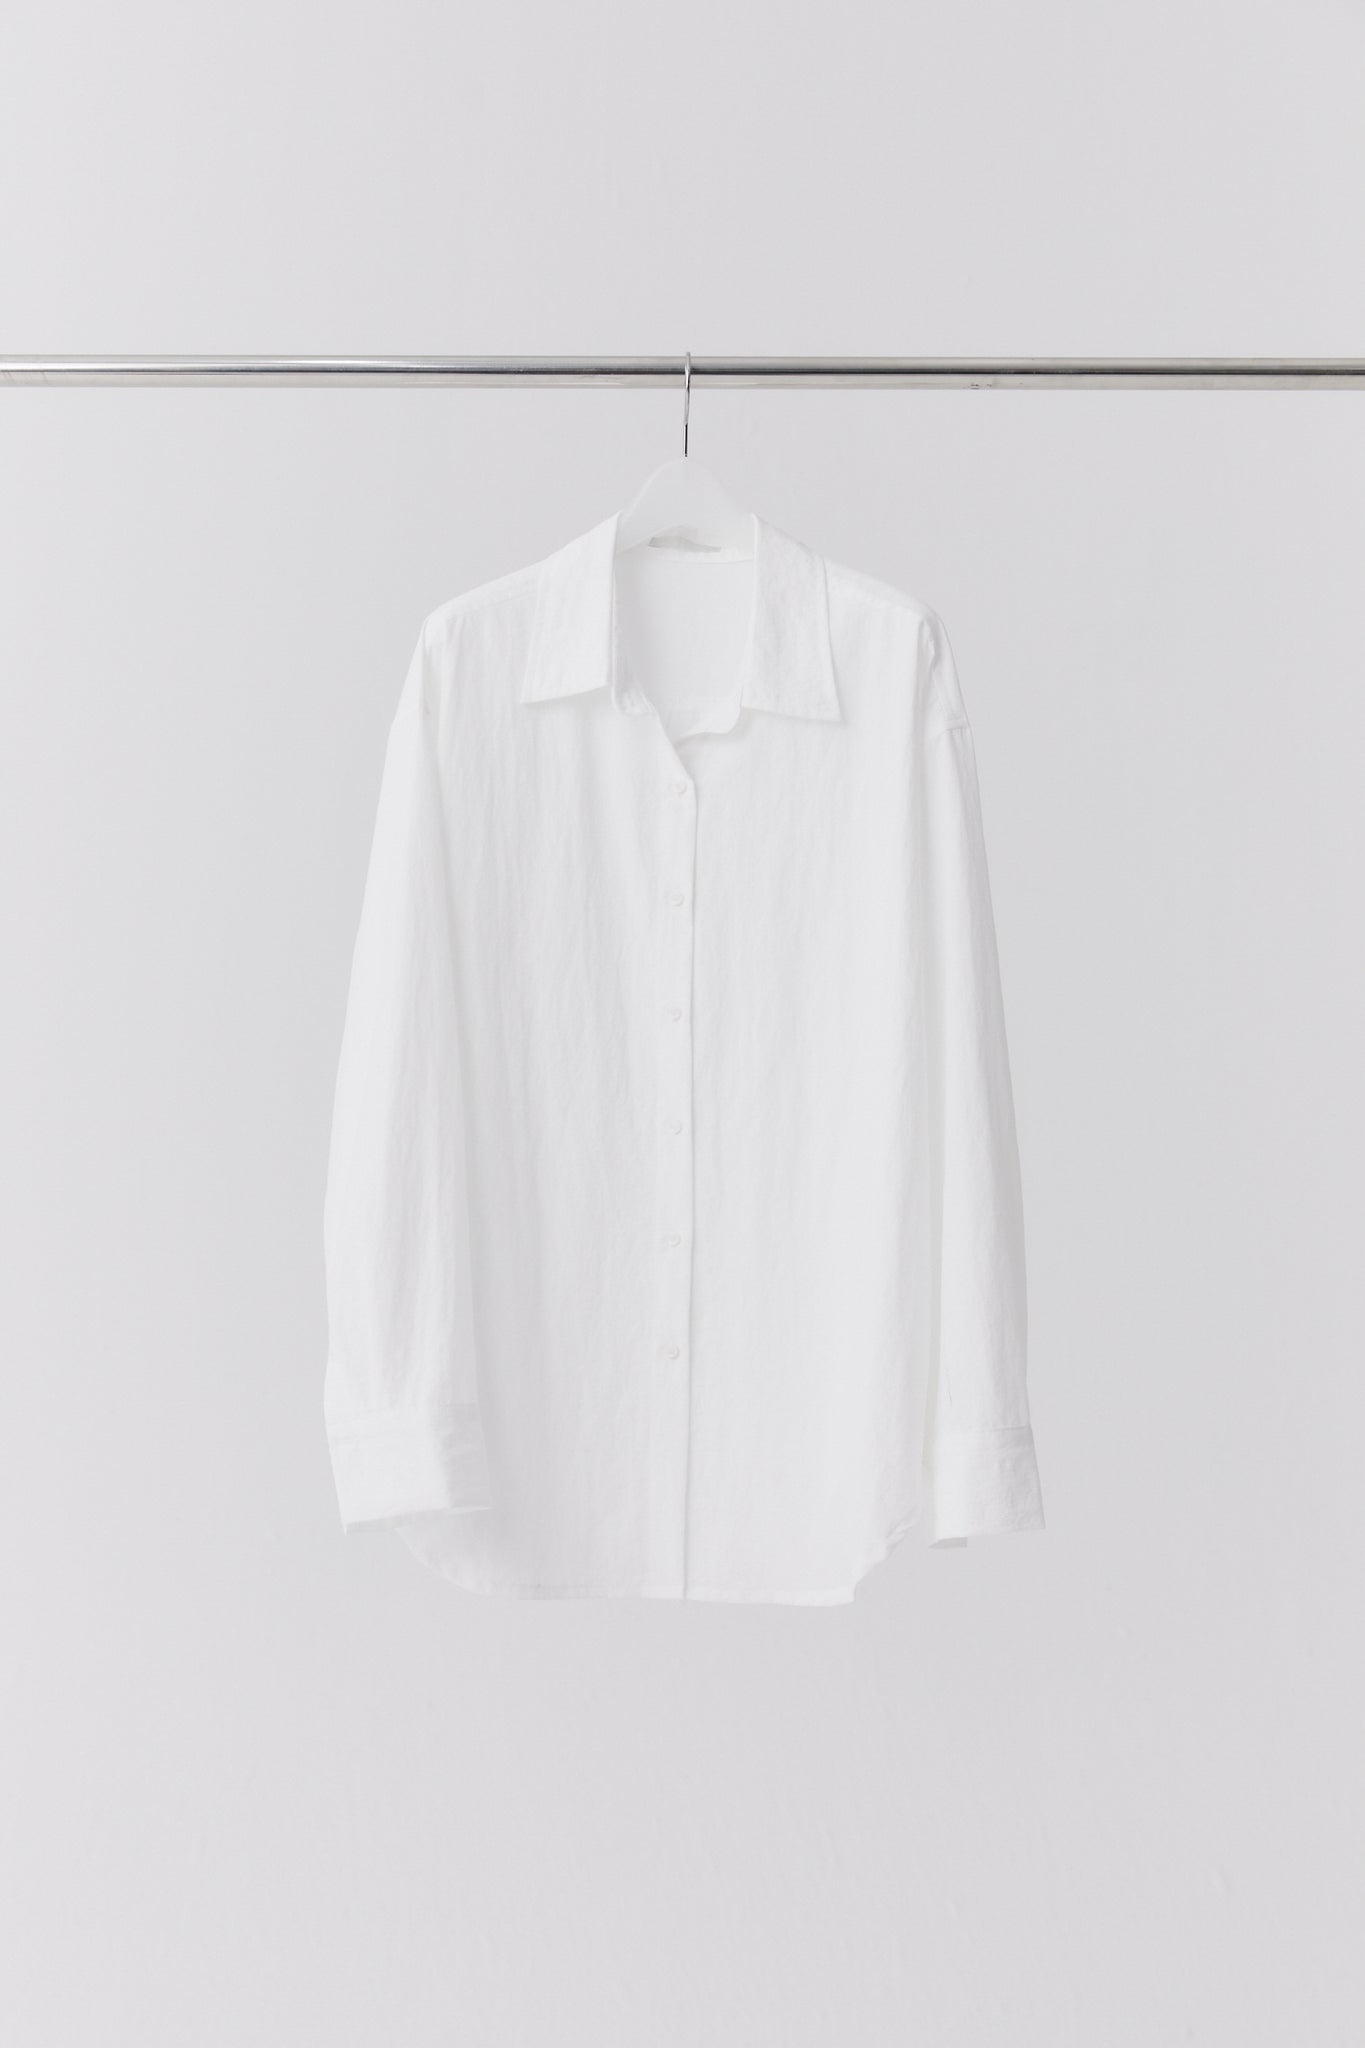 31 waved line shirts (white) - LINGER GALLERY